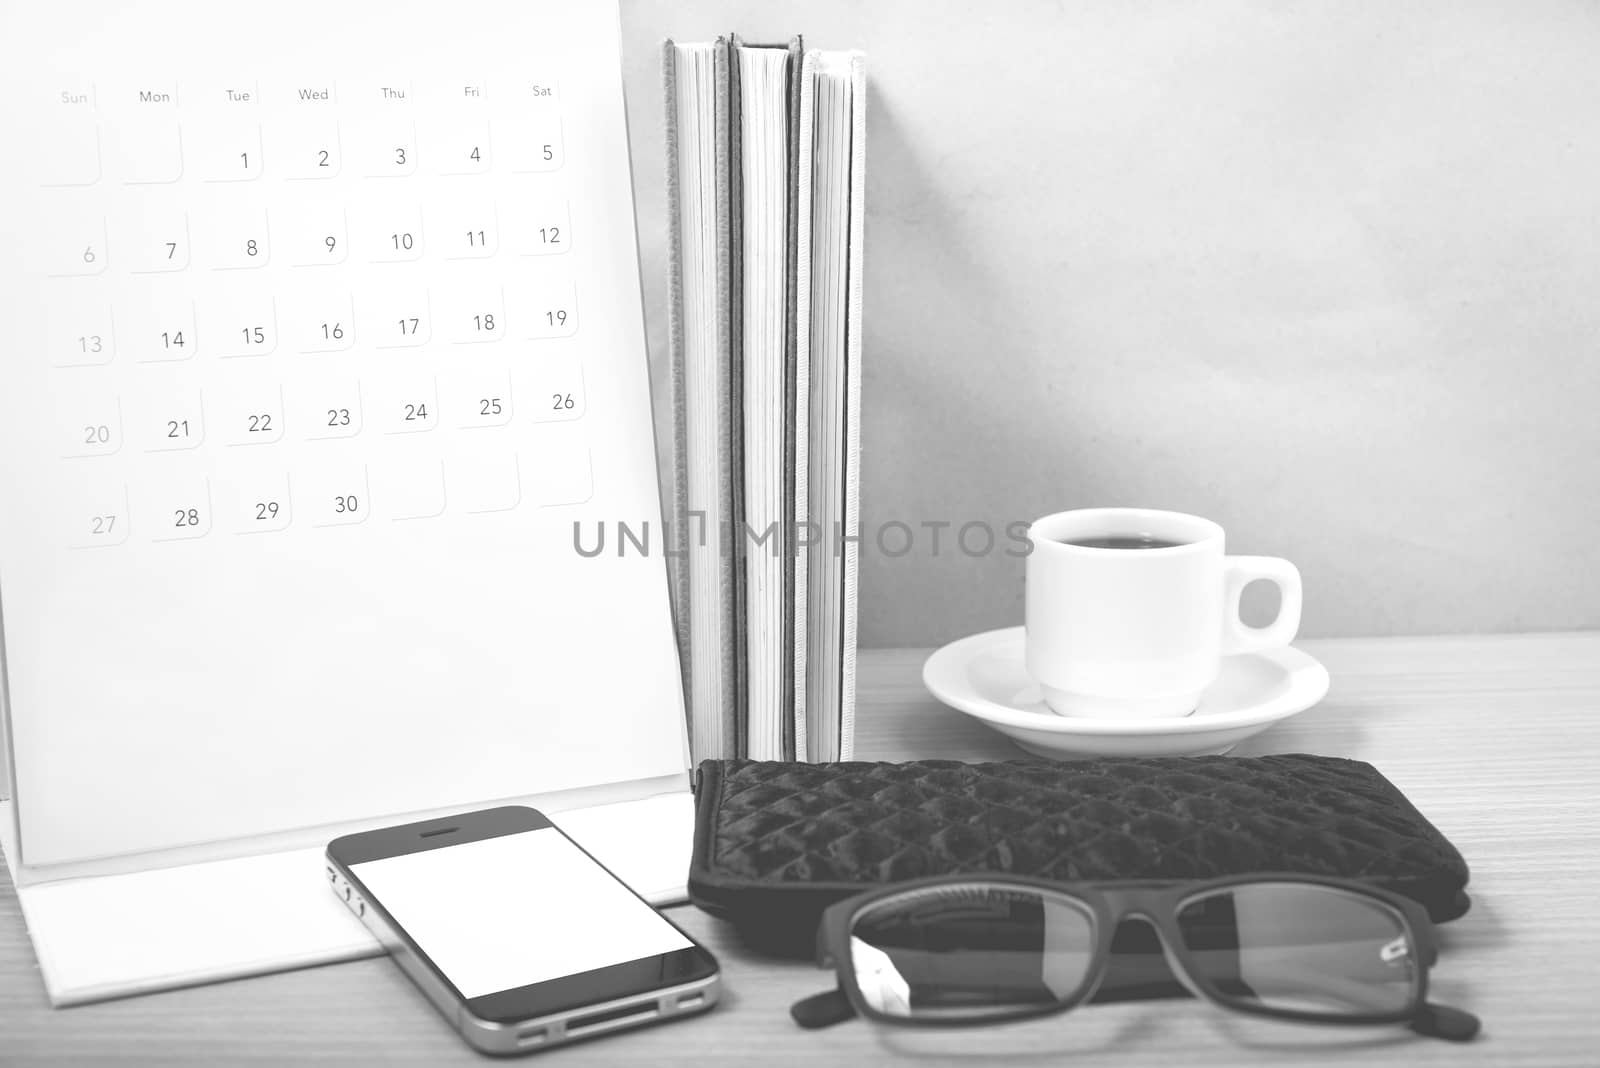 office desk : coffee with phone,stack of book,eyeglasses,wallet,calendar on wood background black and white color